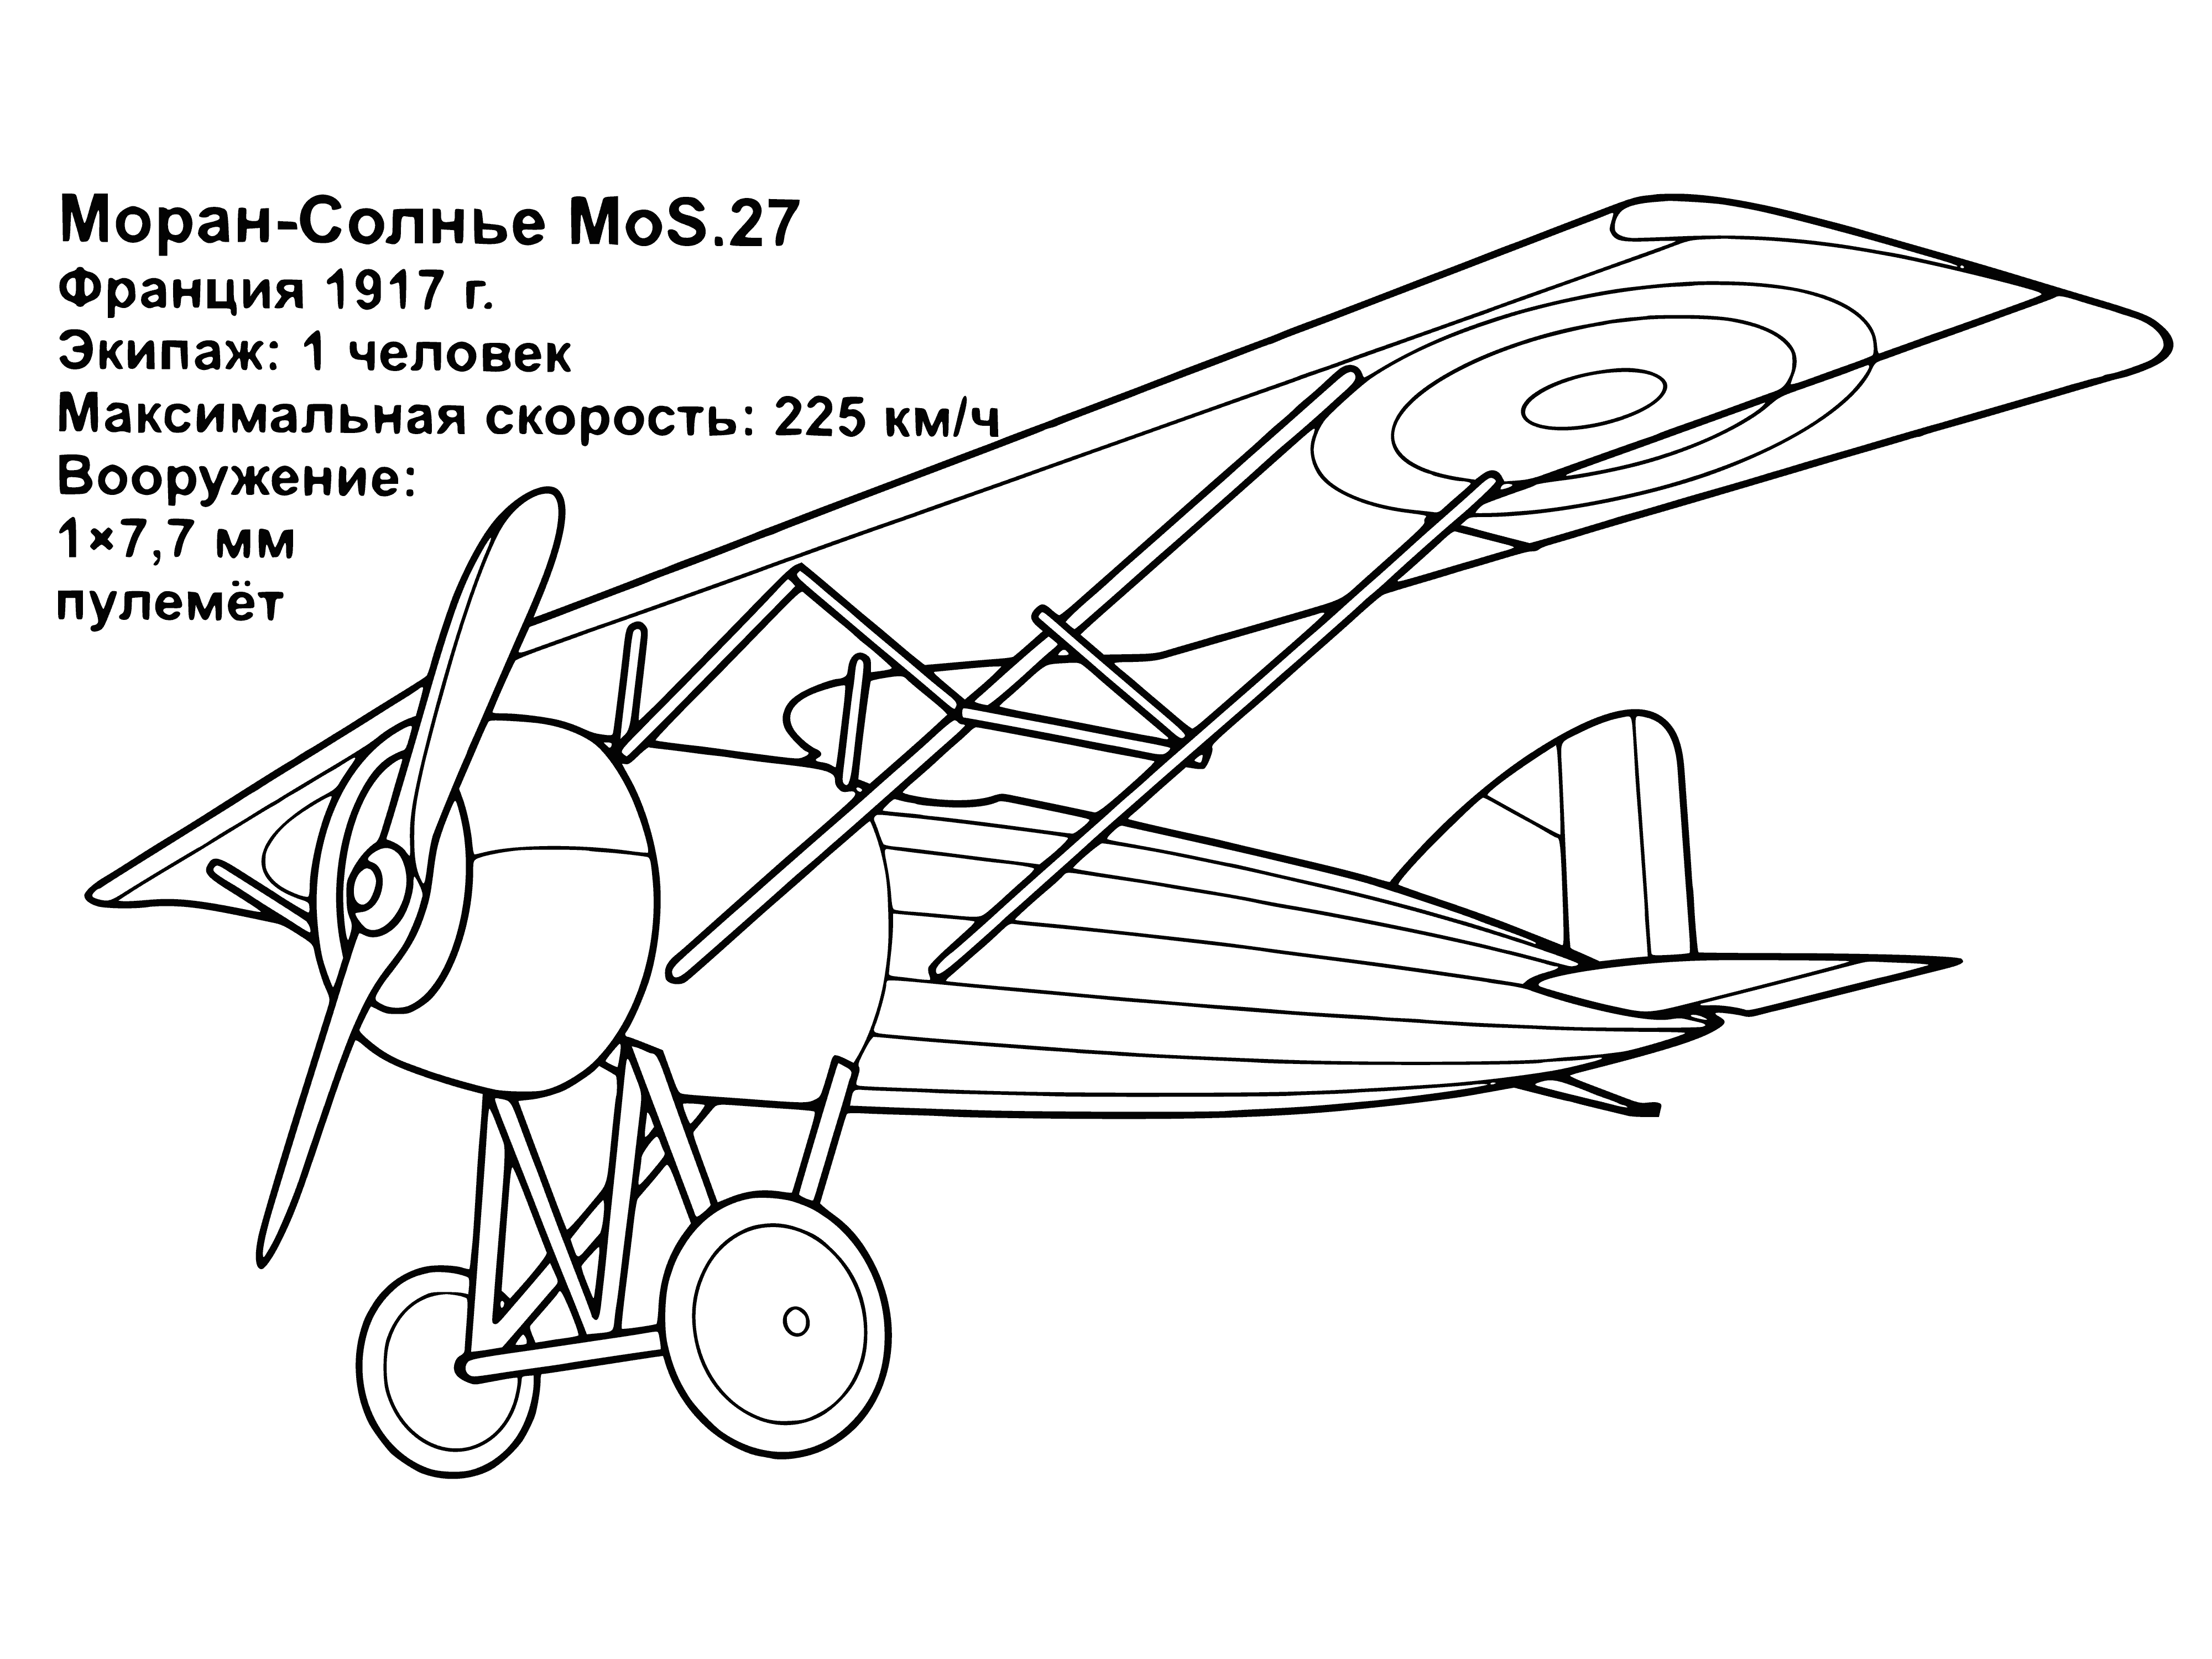 coloring page: Coloring page of 1917 French plane: single engine, long body, short wings, cockpit, passenger seat, grassy field, trees in background.